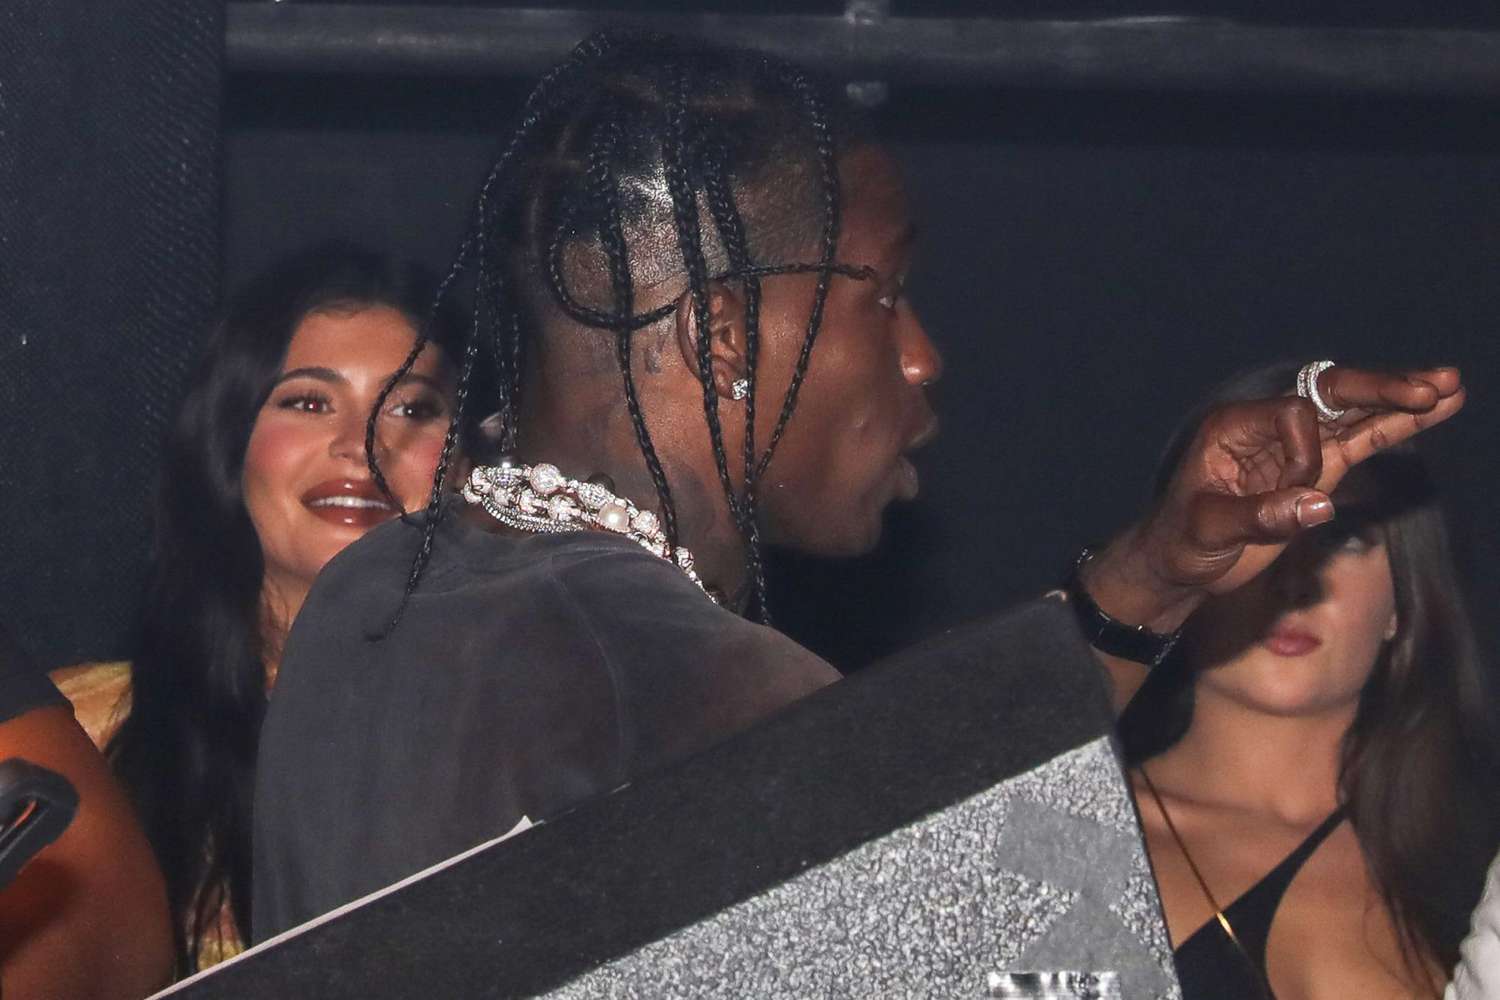 Travis Scott and Kylie Jenner in Miami